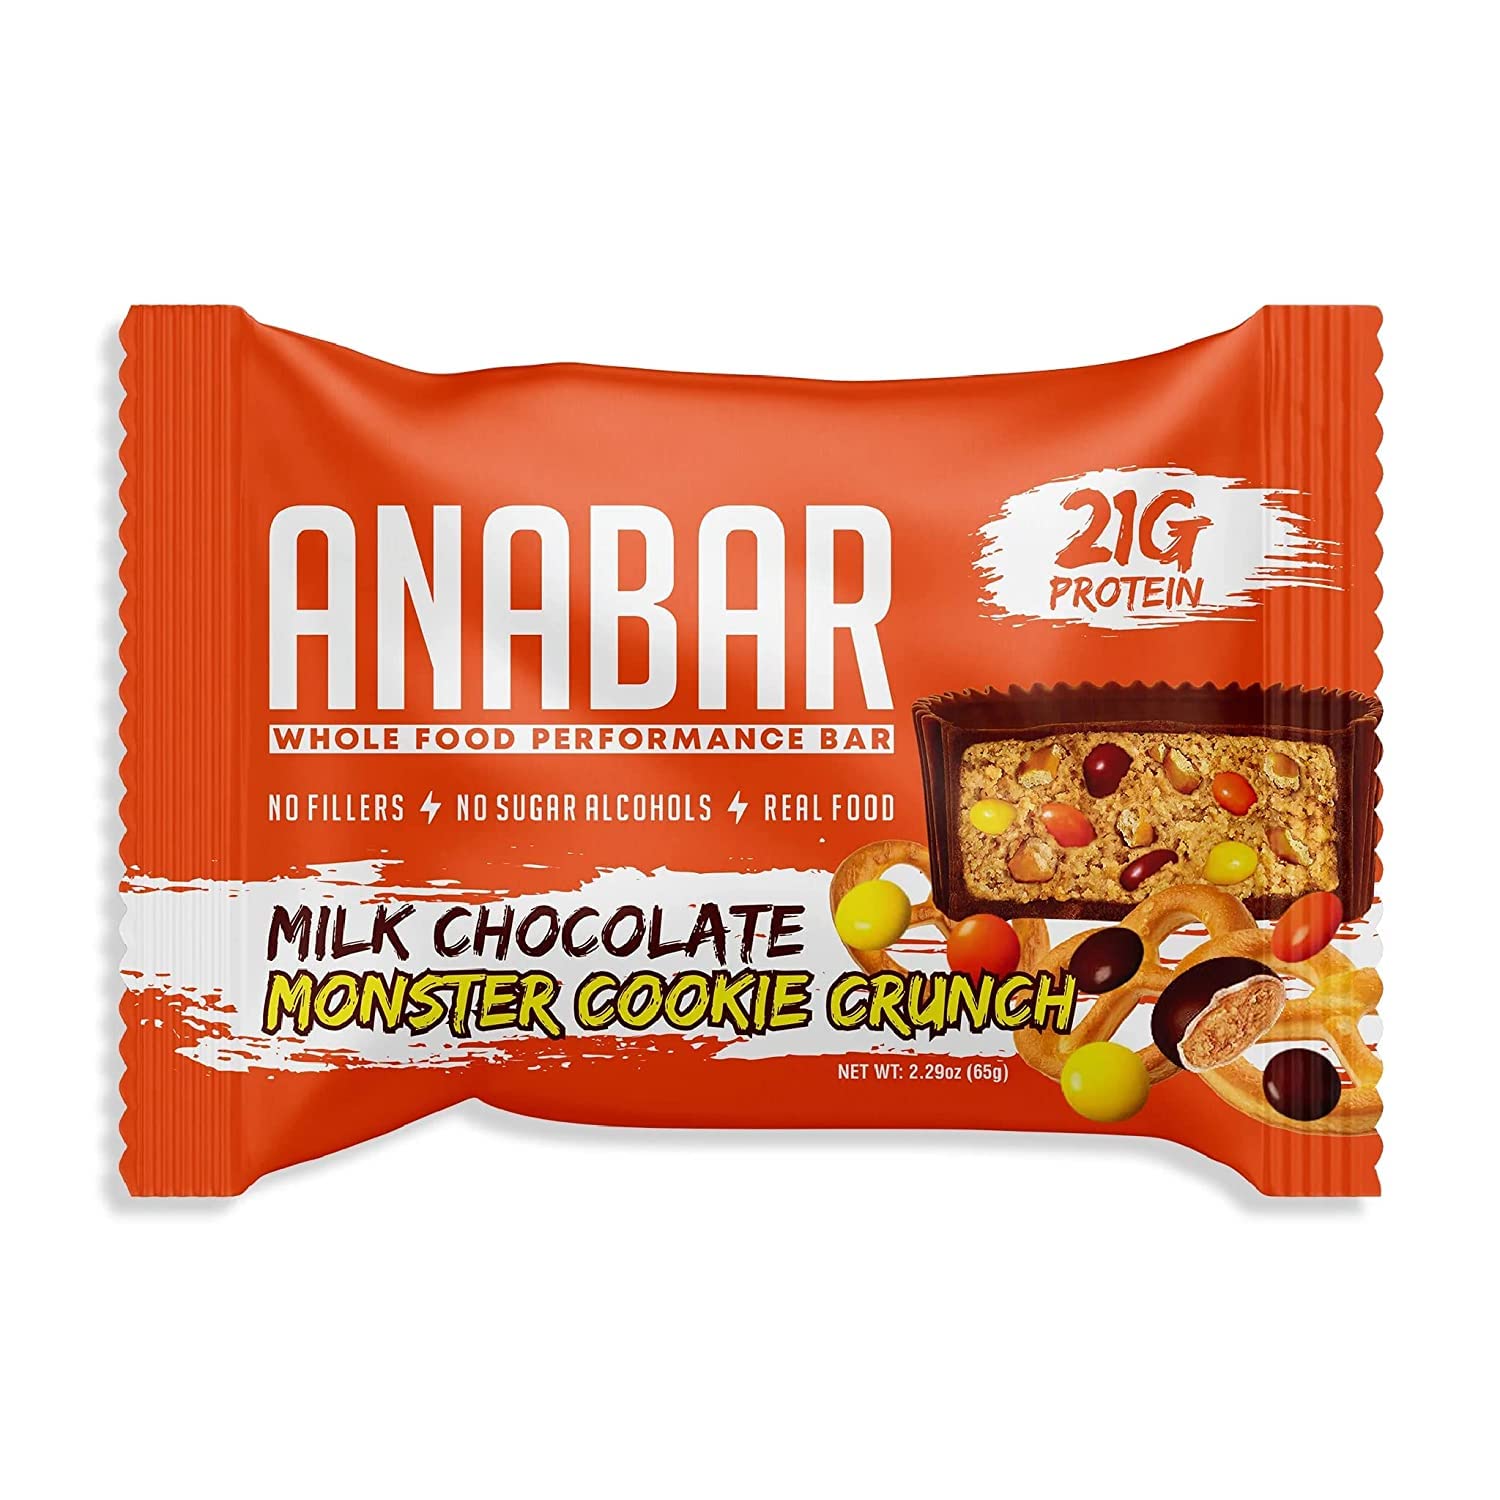 Anabar Protein Packed Candy Bar, Amazing Tasting Bar, Real Food, No Fillers, 21 Grams of Protein, No Sugar Alcohol (12 Bars, Milk Chocolate Monster Cookie Crunch)